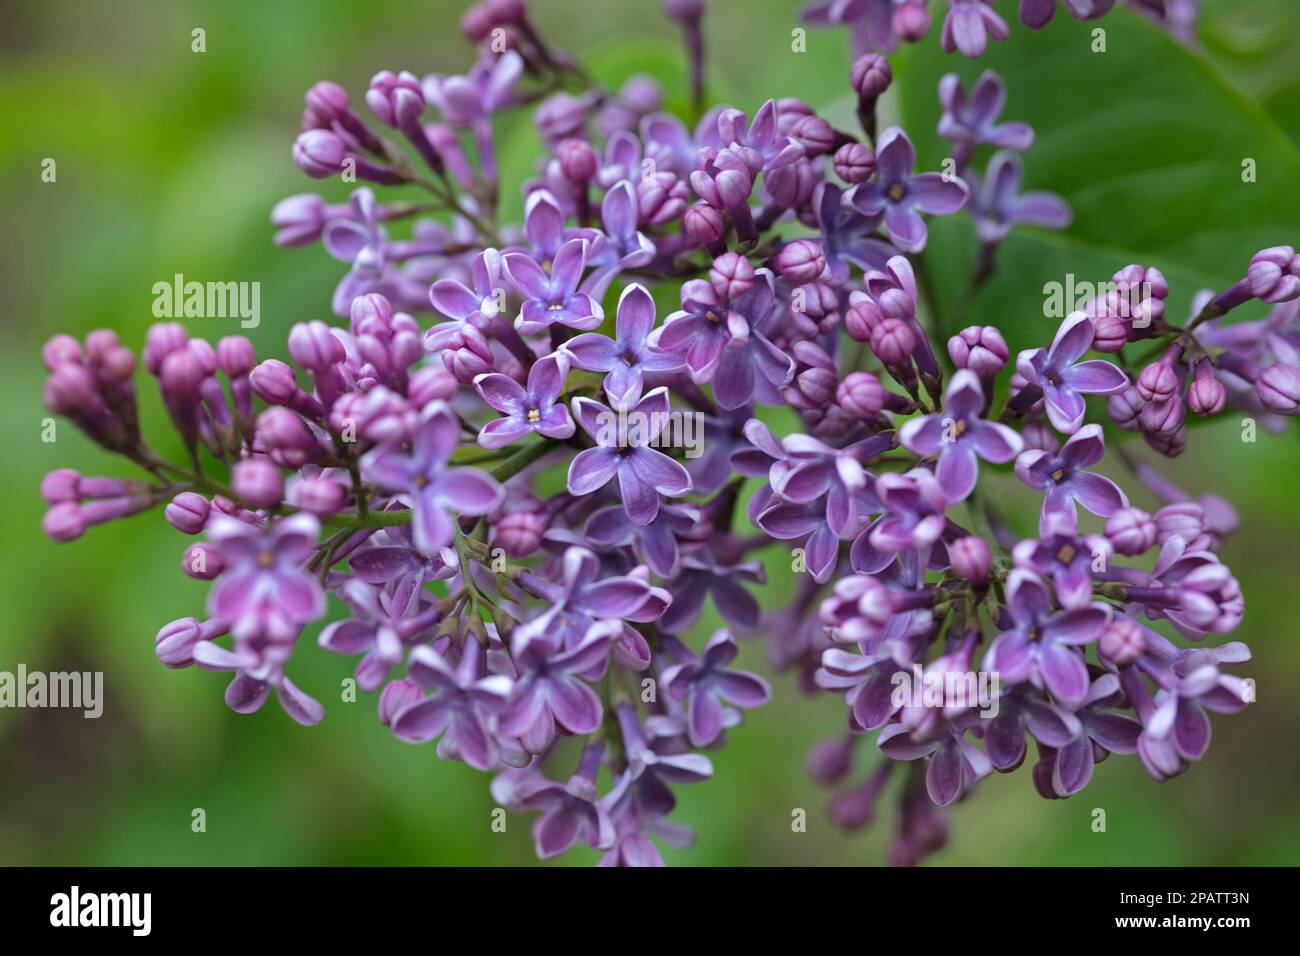 Close-up image of purple flowers of the lilac tree shrub, Syringa vulgaris, blooming in early summer on a natural green leaf background Stock Photo